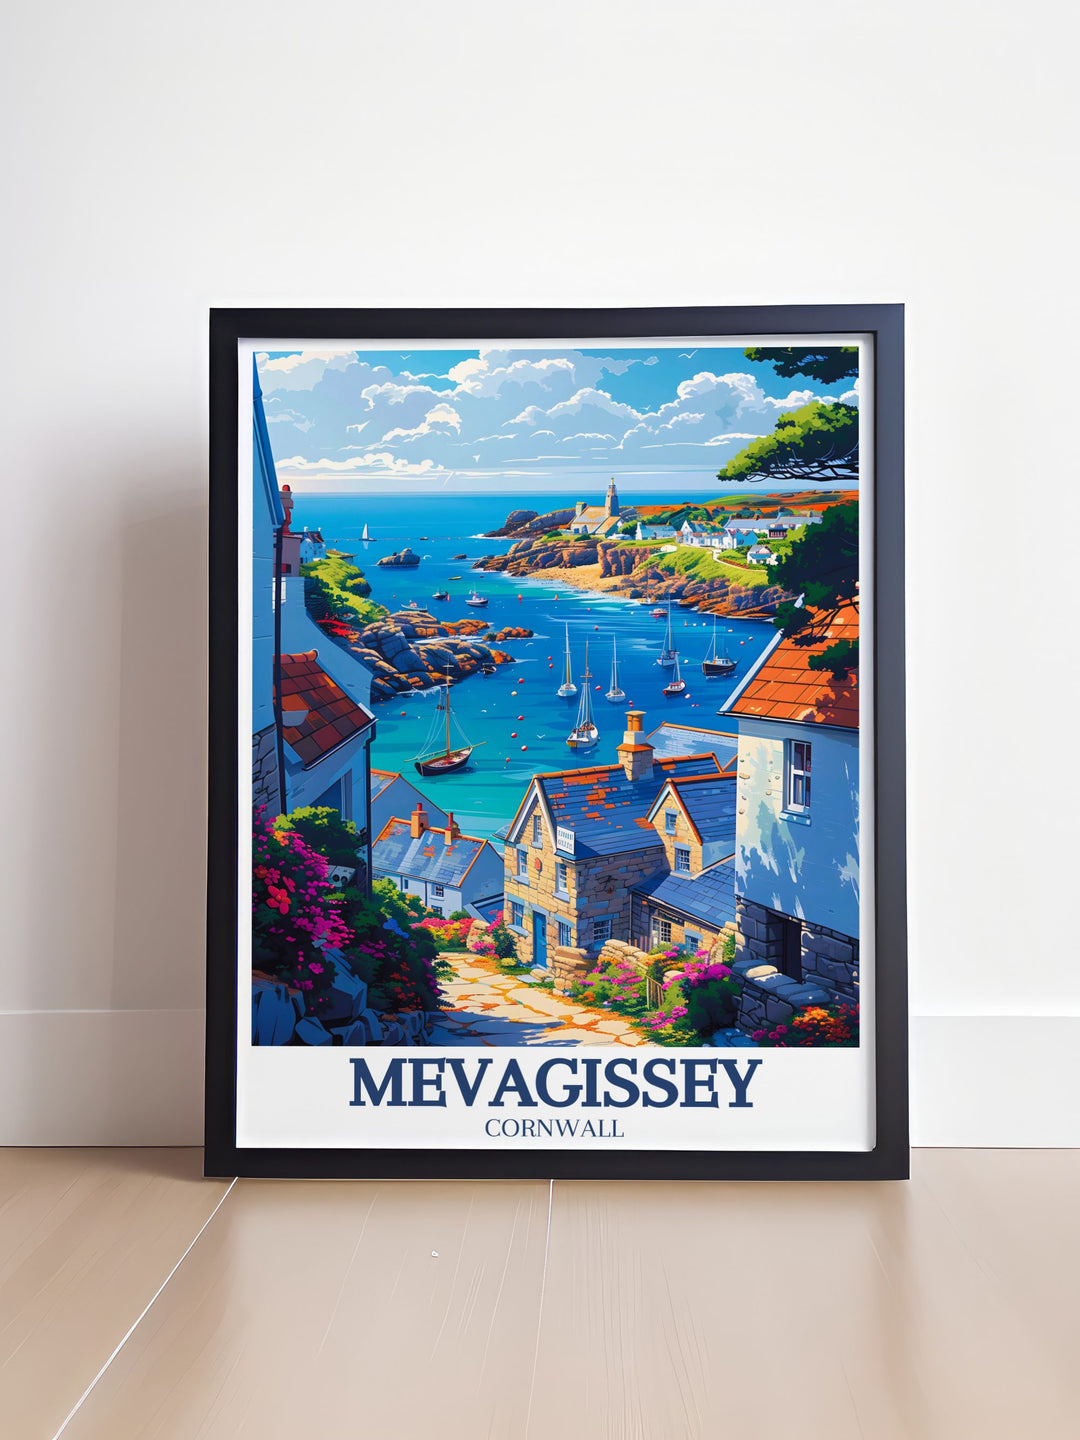 This art print celebrates the quaint charm of Mevagissey, showcasing its colorful cottages, narrow streets, and vibrant harbor. Ideal for those who appreciate picturesque coastal towns, this poster brings the enchanting beauty of Mevagissey into your home.